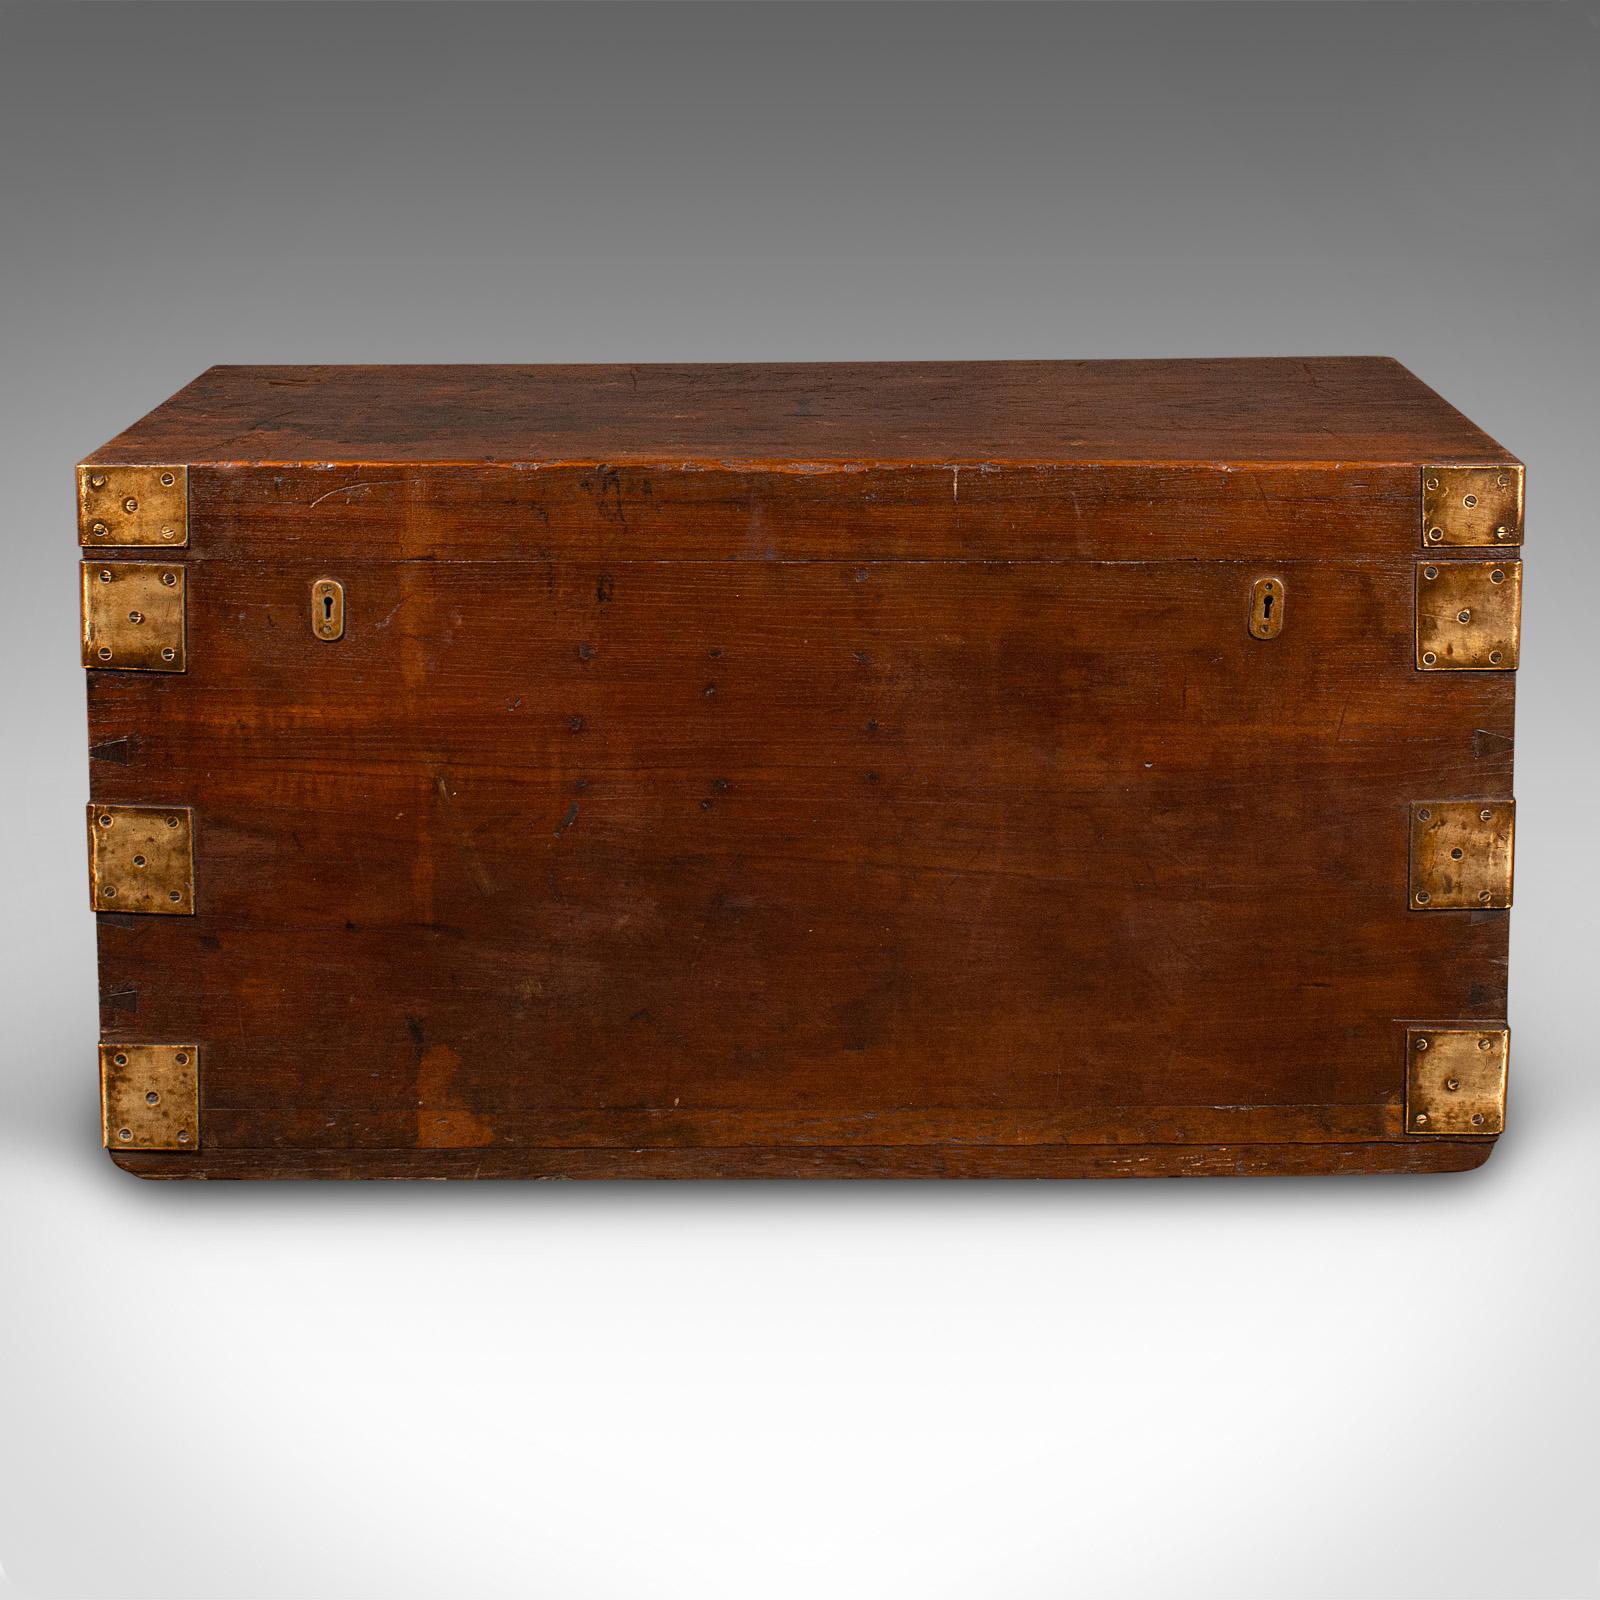 British Vintage Campaign Silver Chest, English, Teak, Brass, Shipping Trunk, Art Deco For Sale